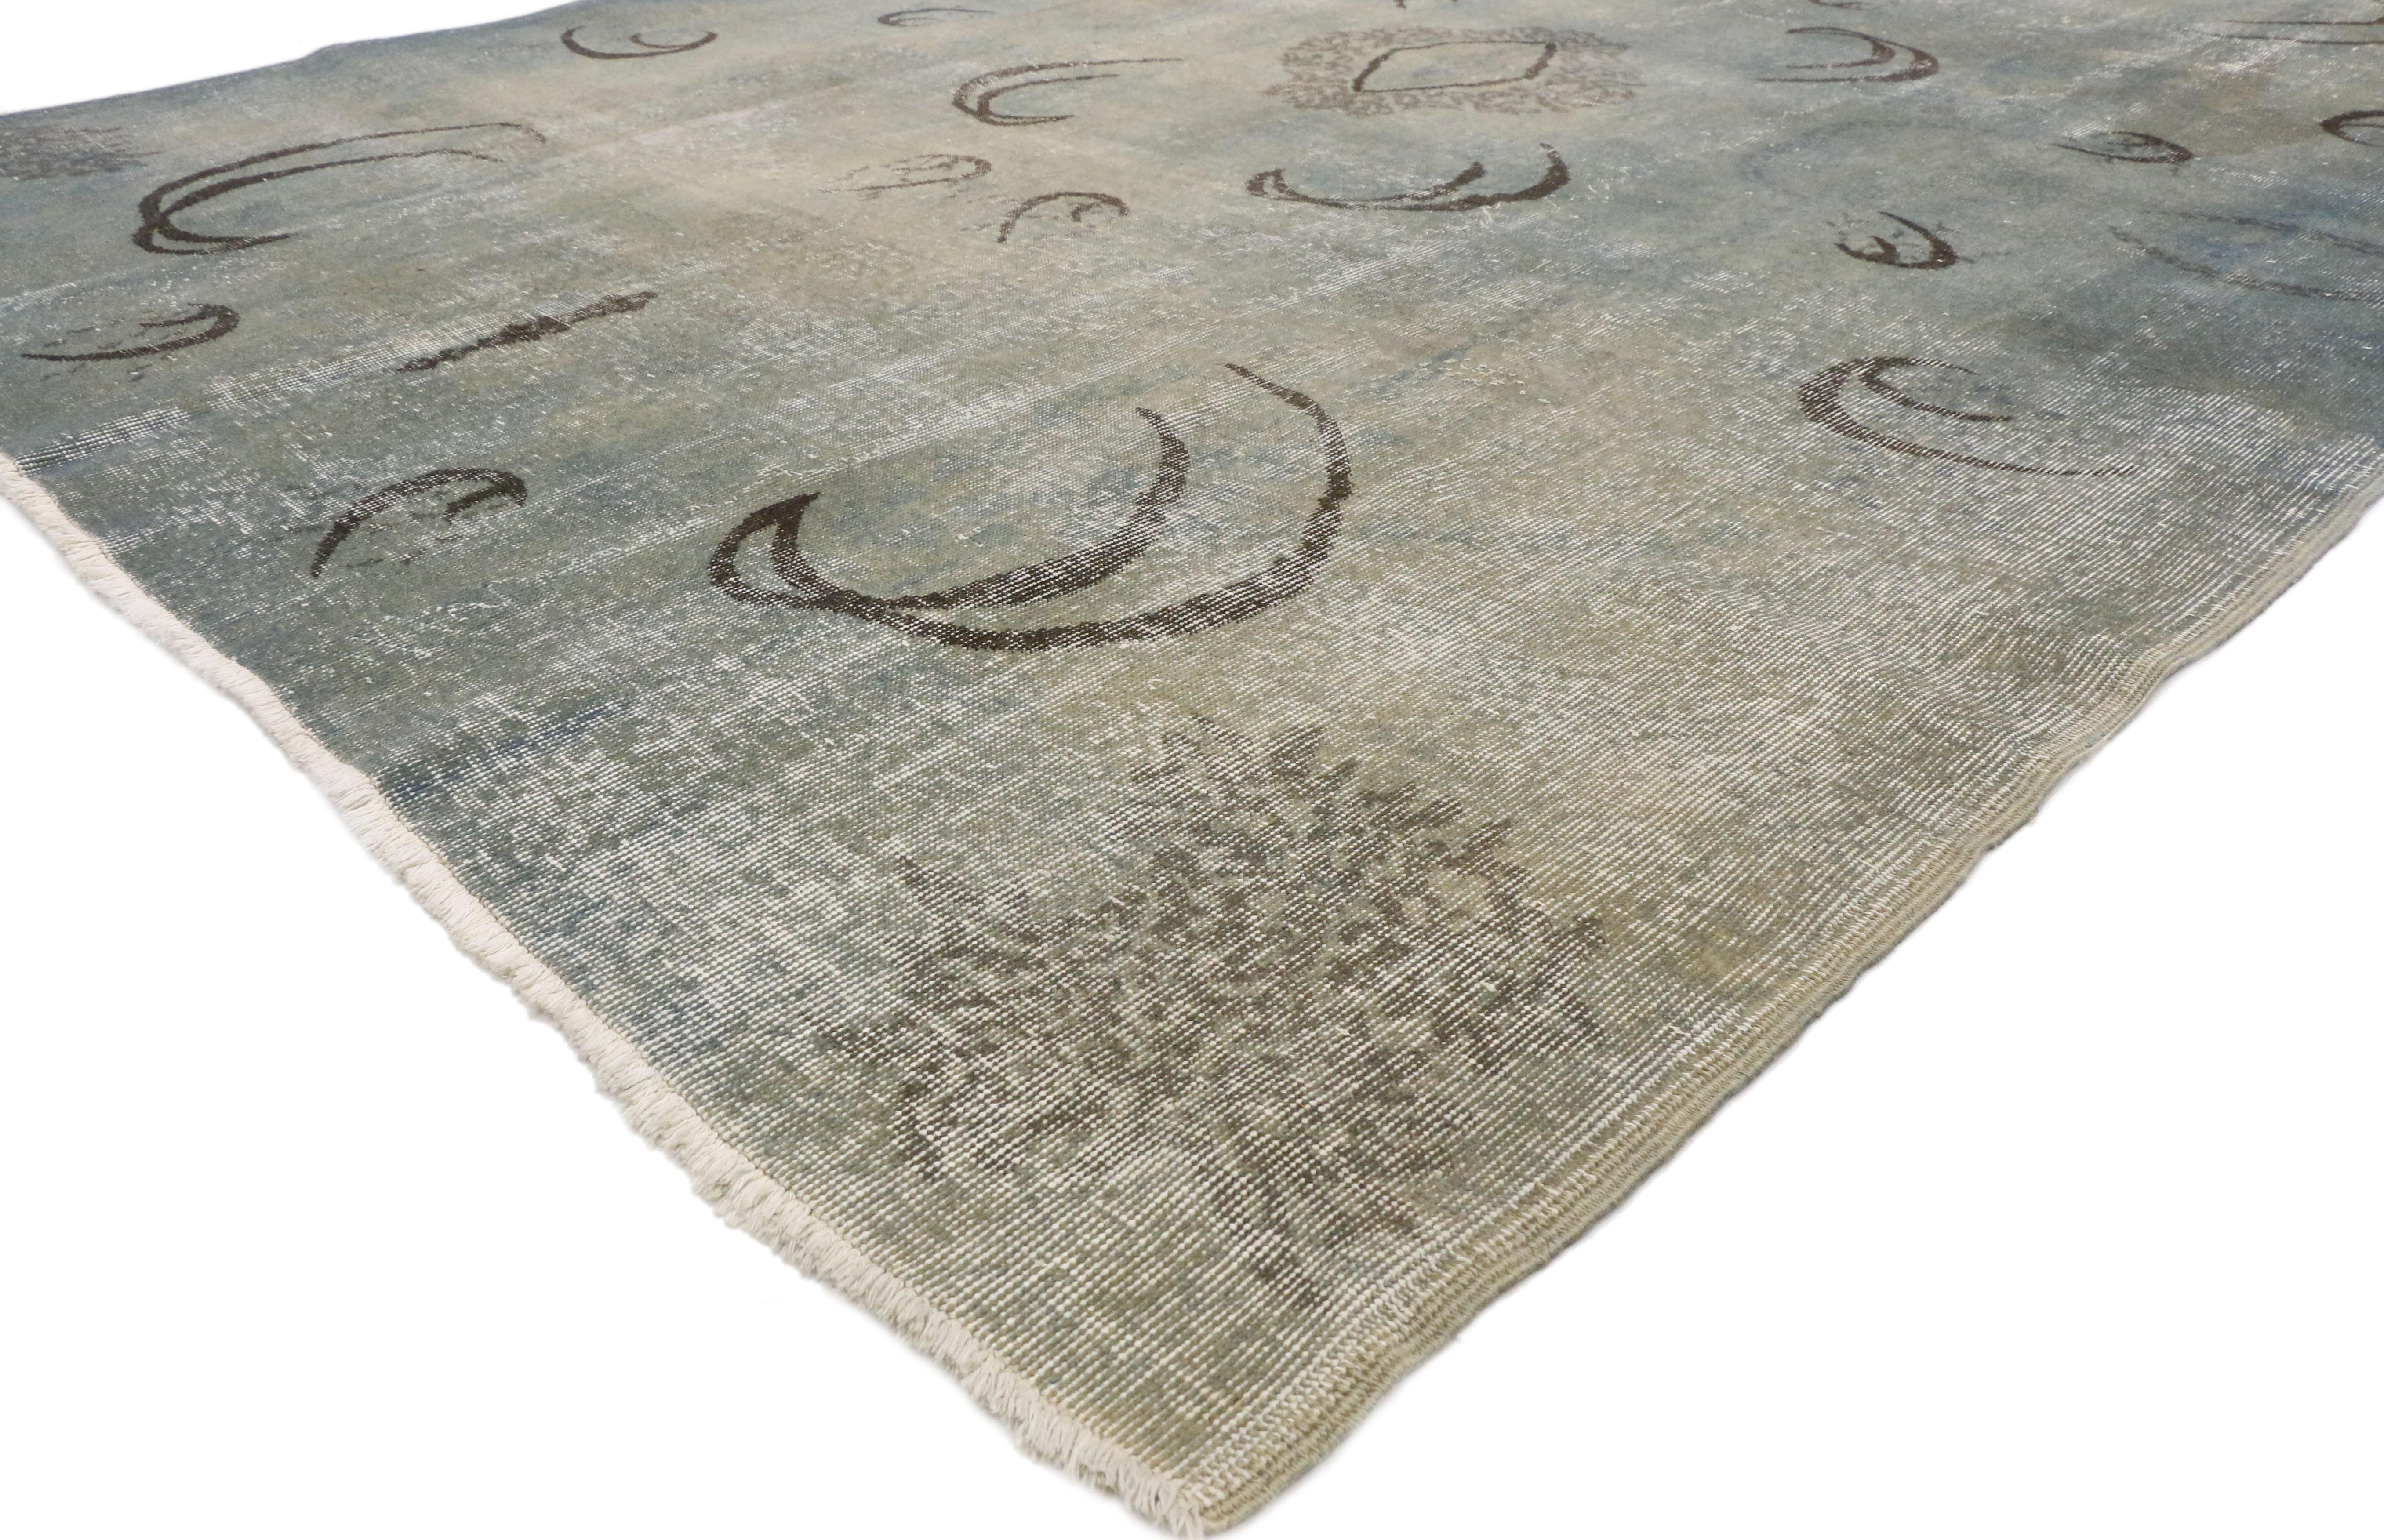 50856 Distressed Vintage Turkish Sivas Rug 07'05 X 10'02.
With its simplicity and Zeki Muren style, this hand-knotted wool distressed vintage Turkish Sivas rug provides a feeling of cozy contentment without the clutter. The weathered field features